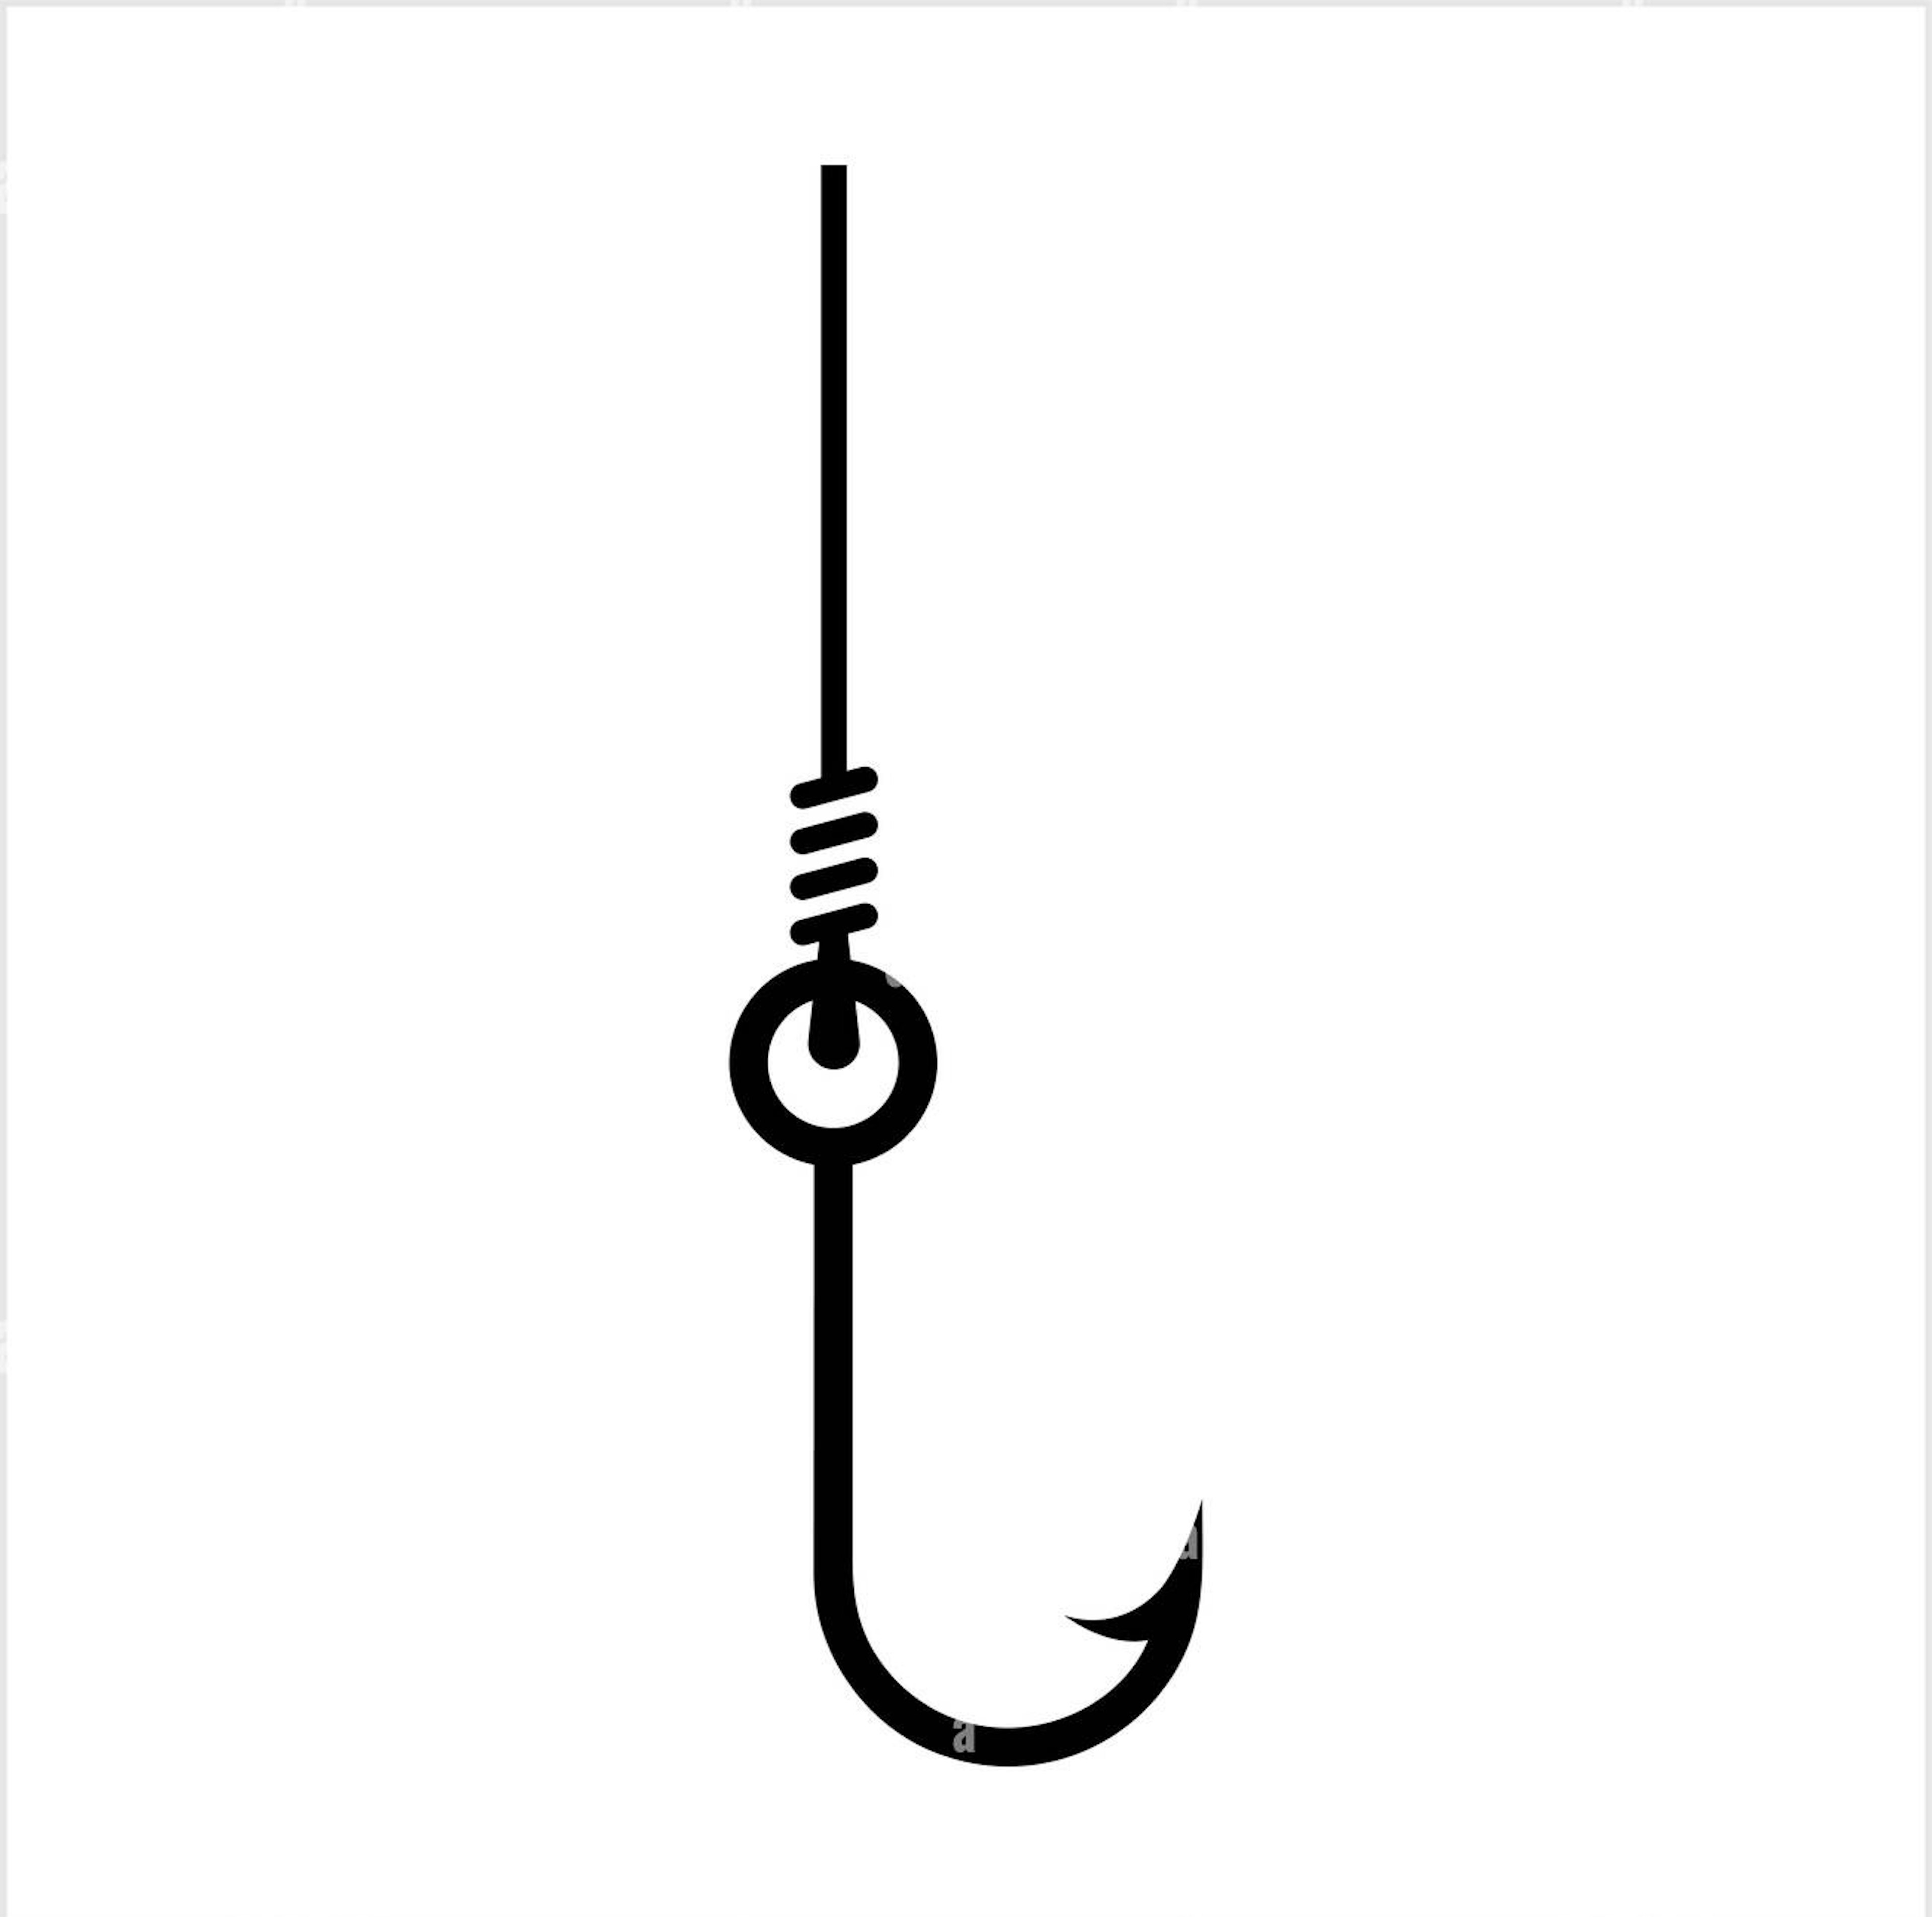 React: Understand what a hook is